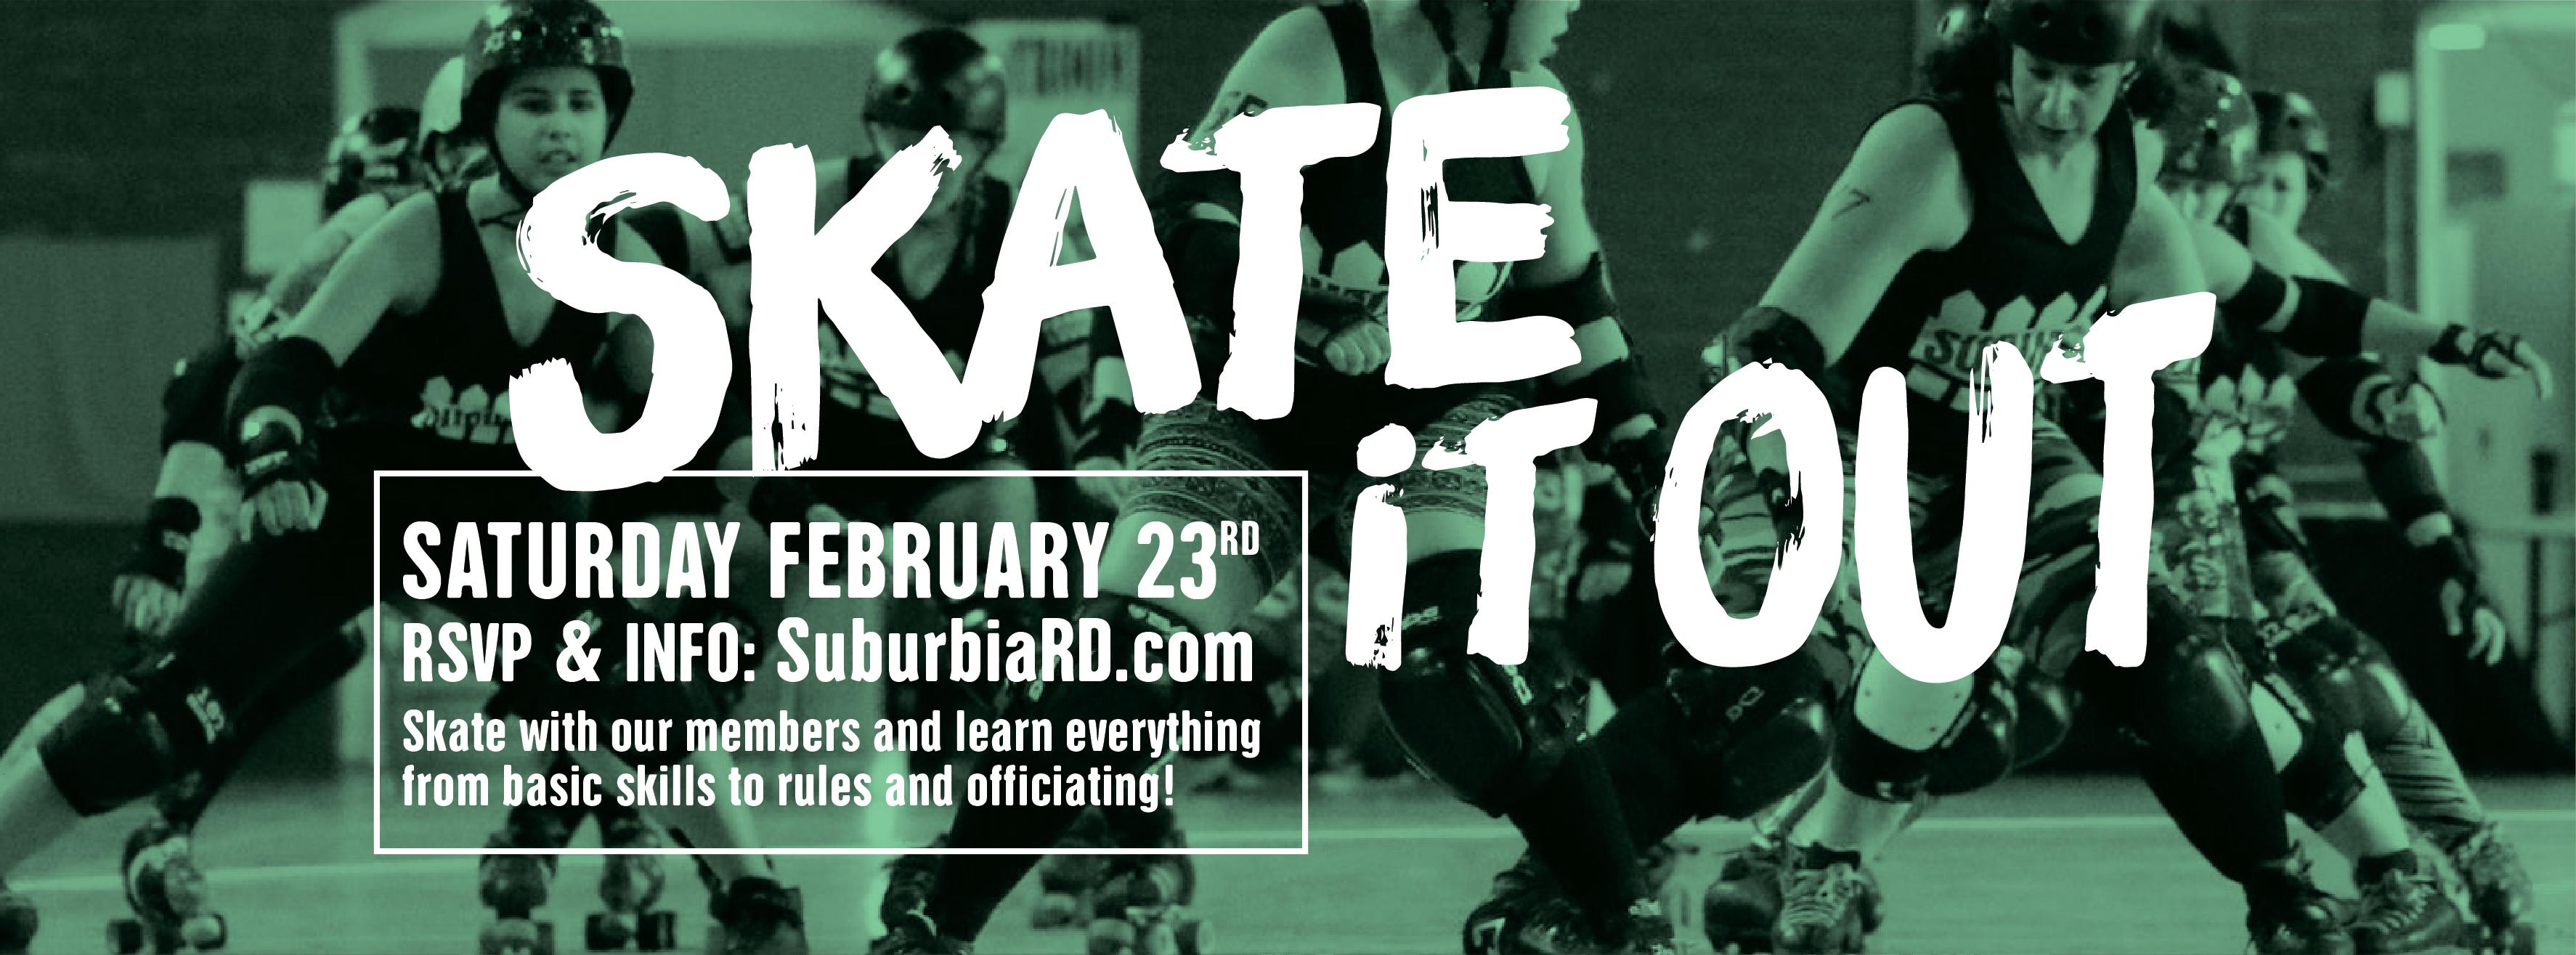 Skate It Out on Saturday, February 23rd